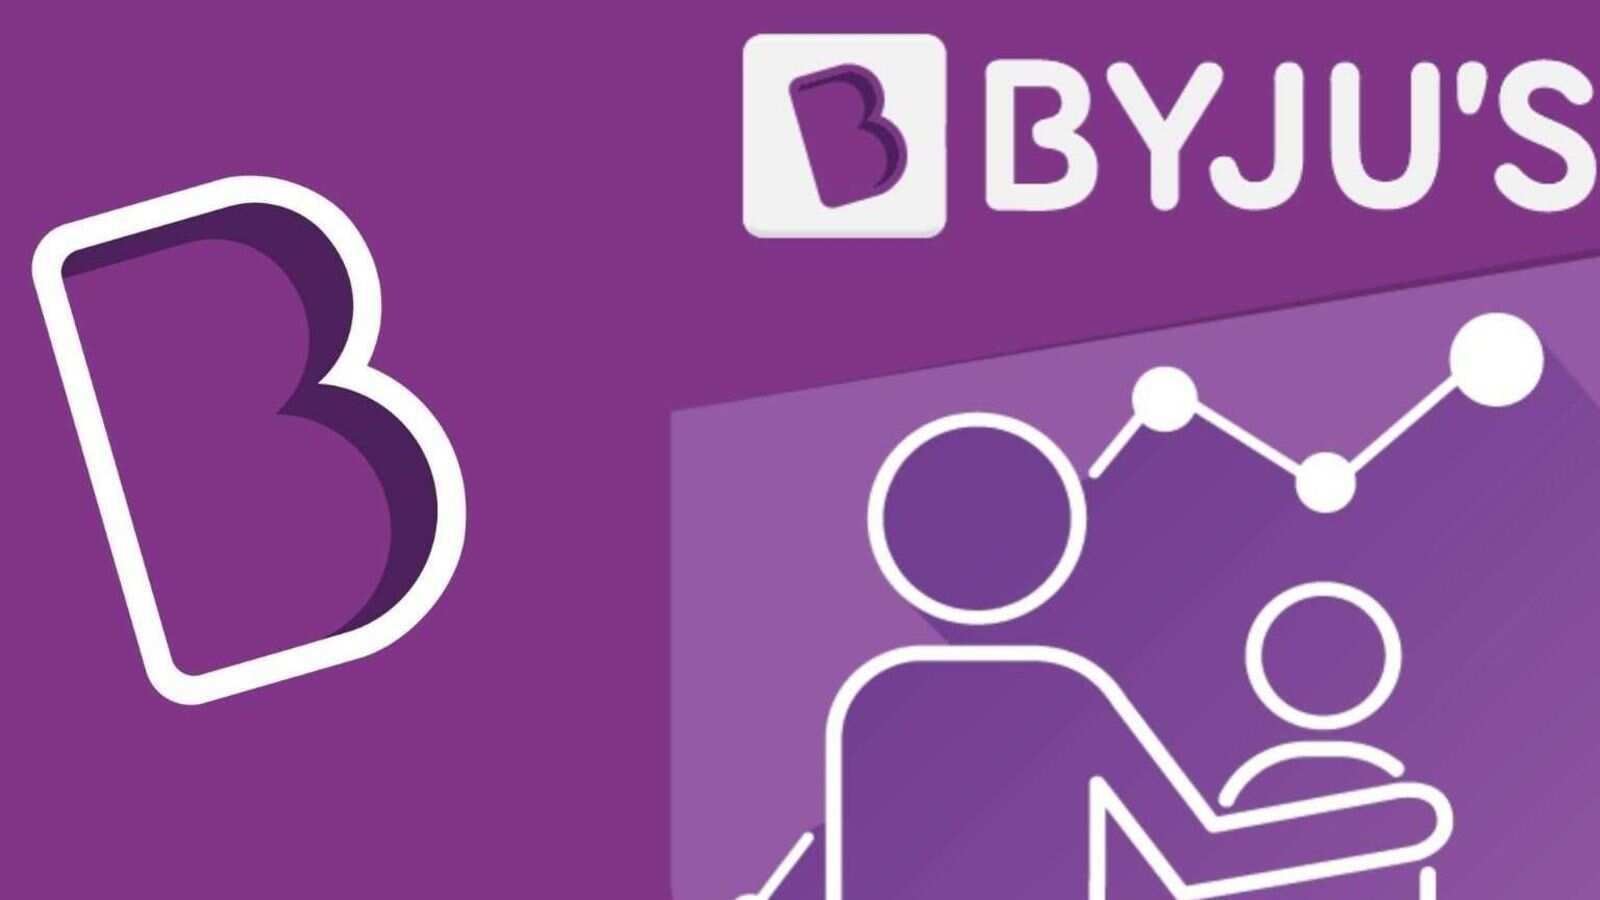 India’s most valuable startup Byju’s and their upcoming plans